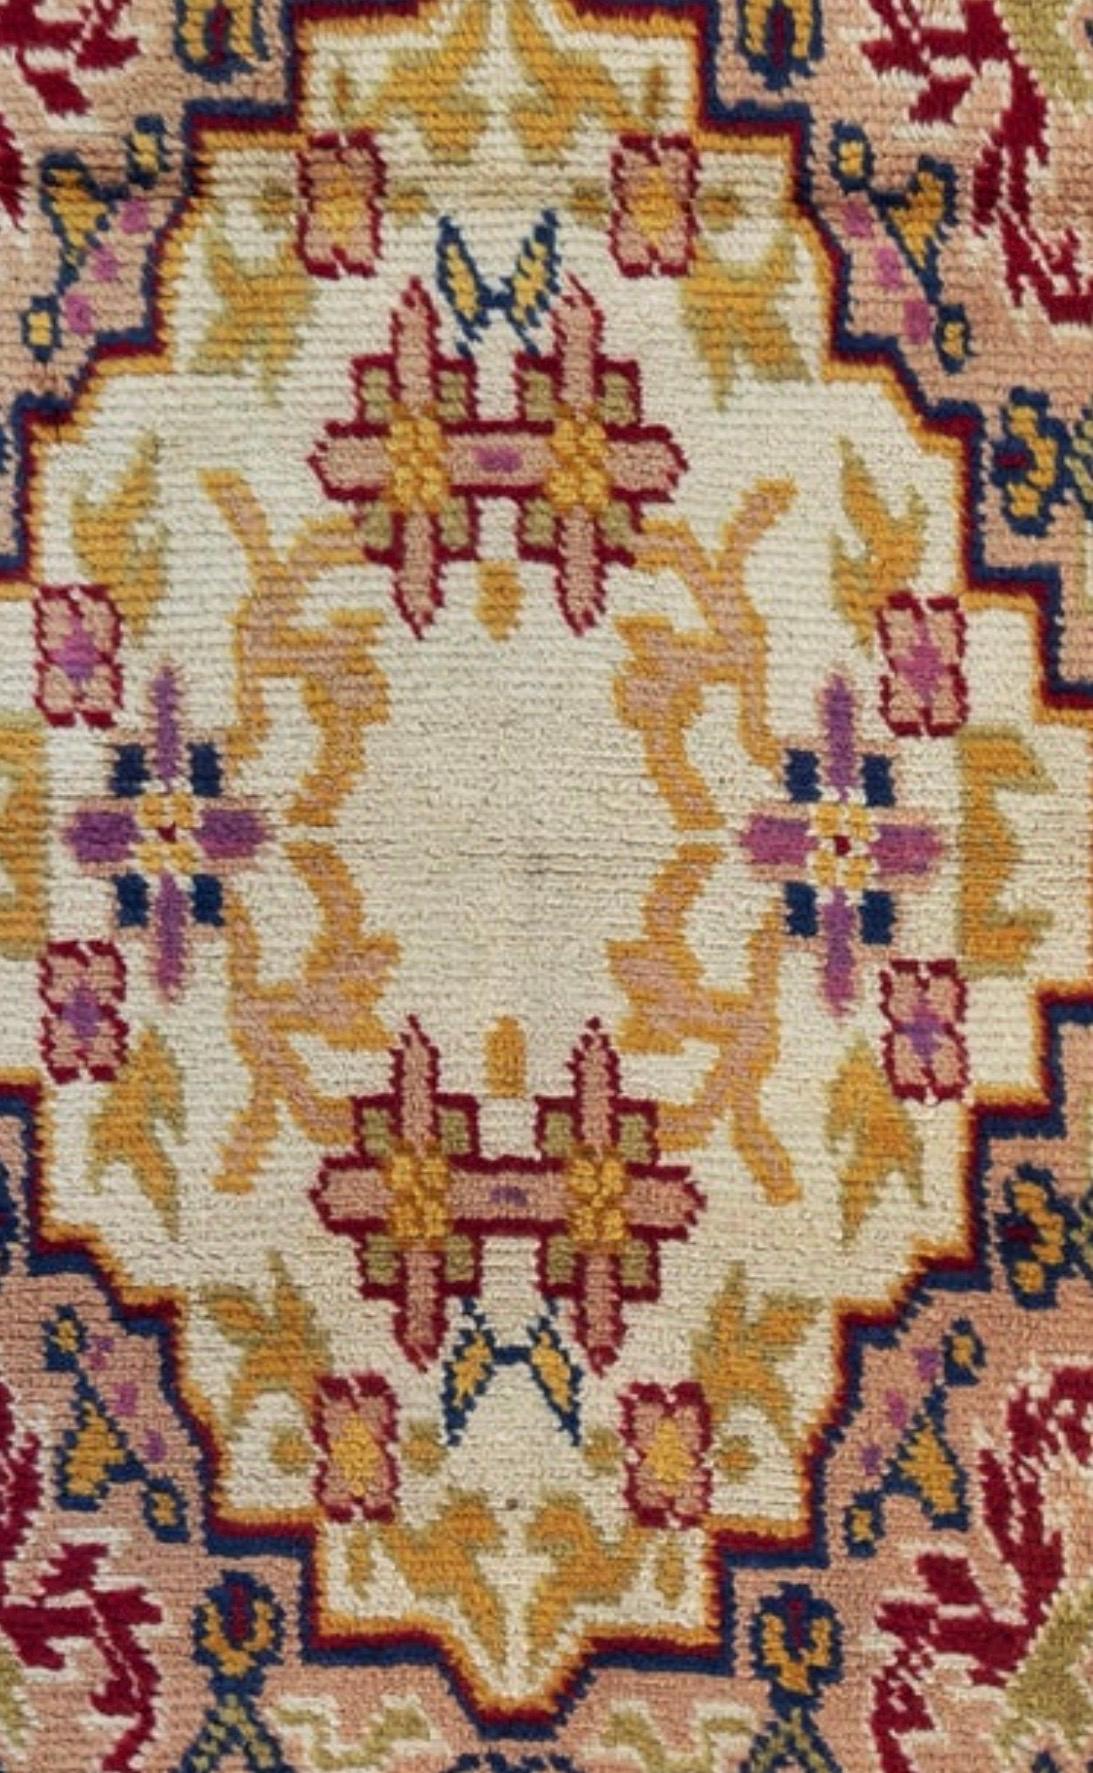 This is a lovely vintage gold rose ivory floral Spanish Savonnerie small rug, circa 1940s, measuring 3.2 x 4.10 ft.